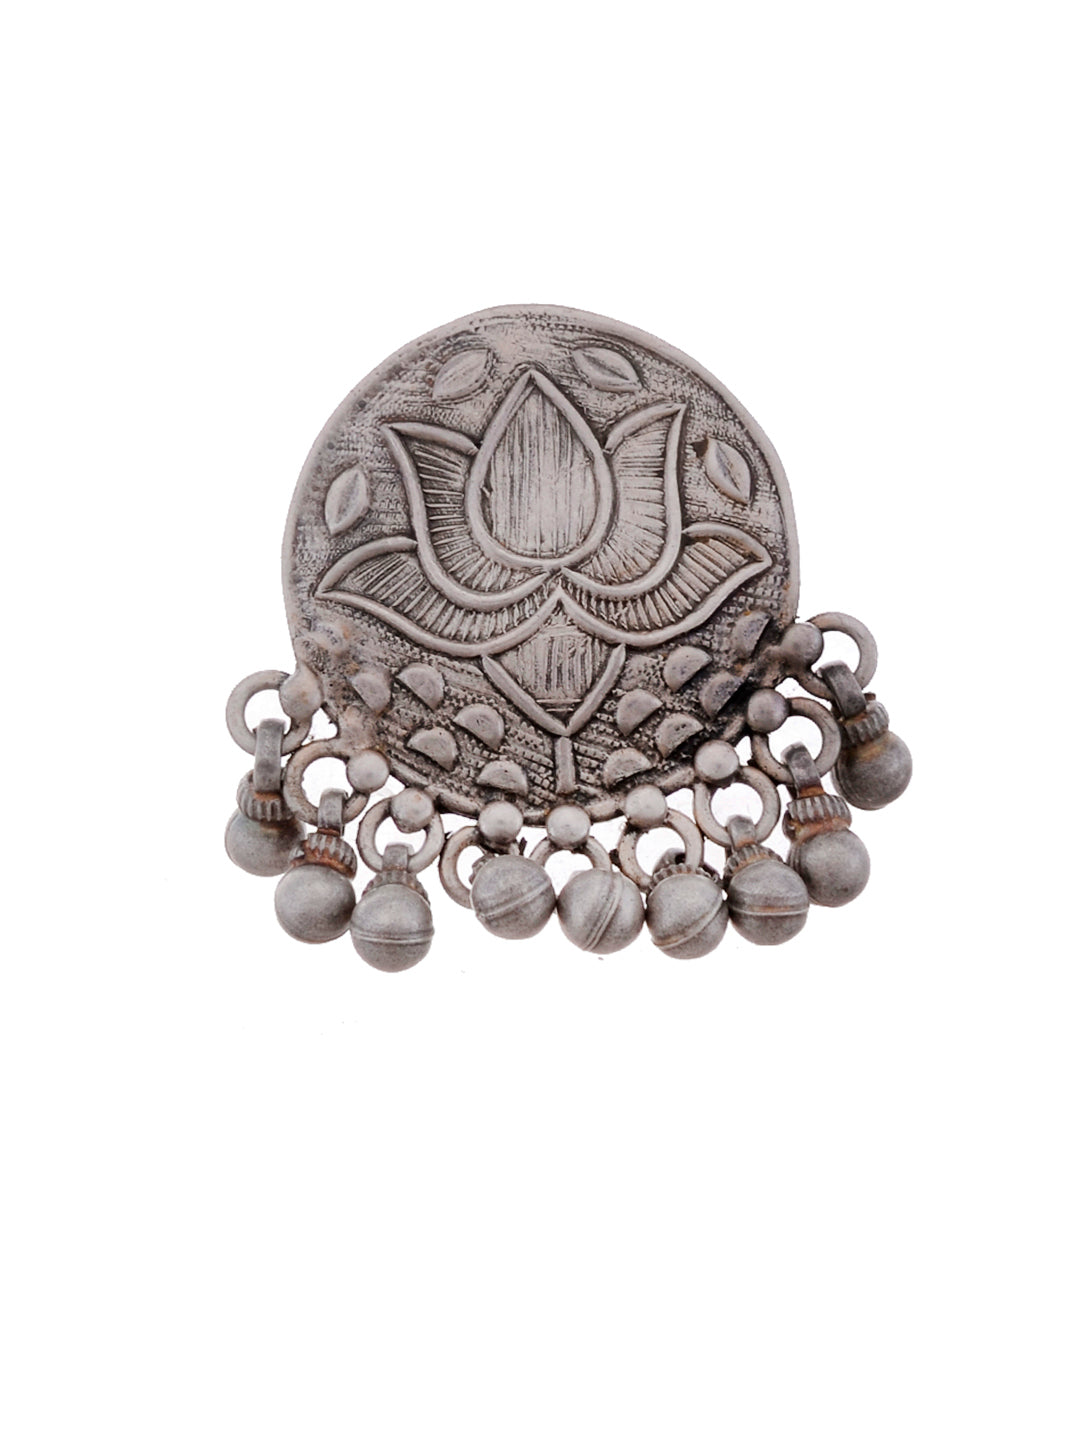 Handcrafted 92.5 Sterling Silver Oxidized lotus Adjustable Ring